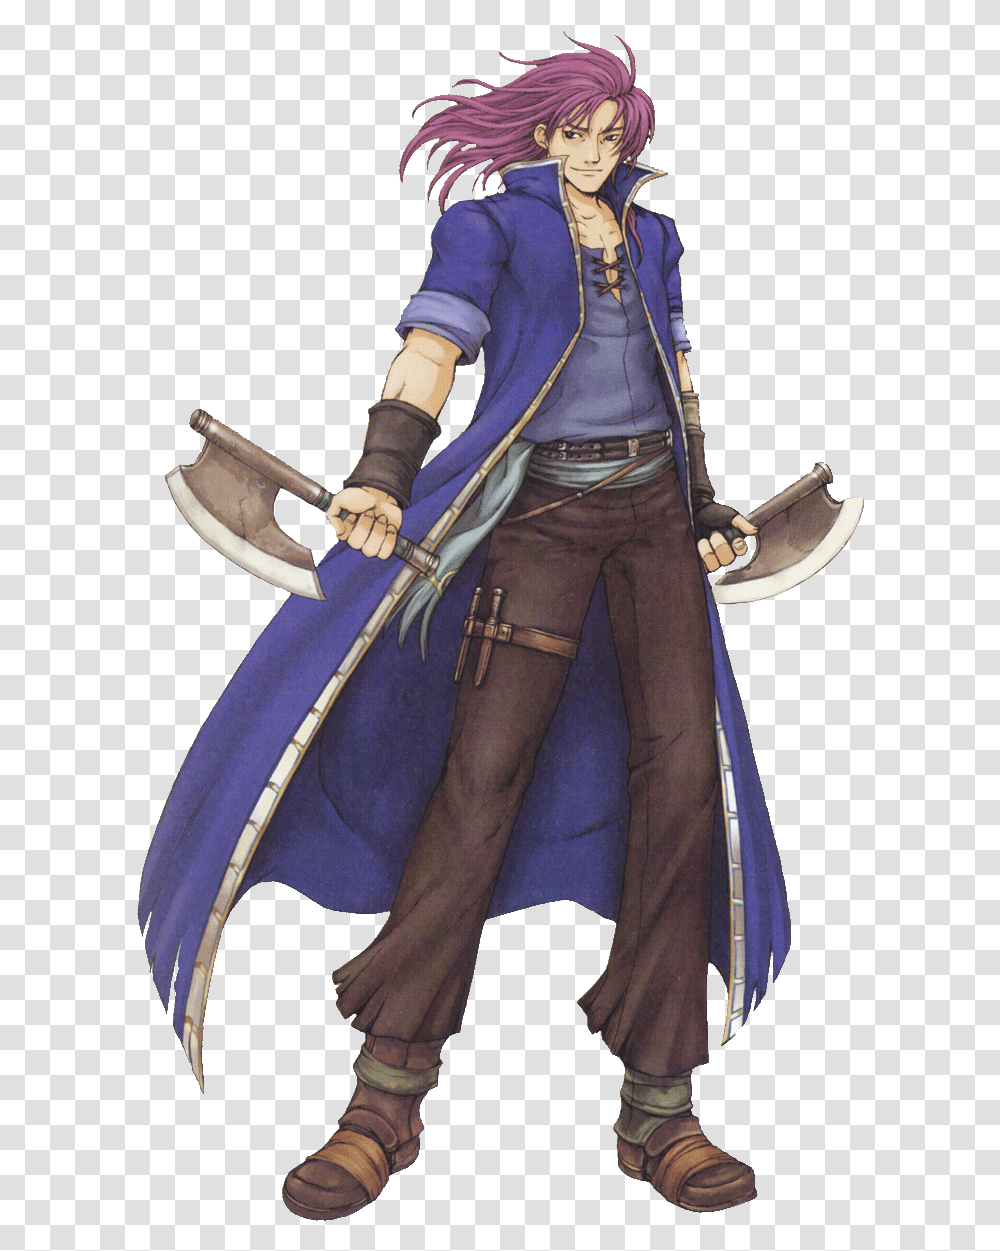 Geese Fire Emblem Wiki Geese Fire Emblem Heroes, Person, Clothing, Costume, Duel Transparent Png